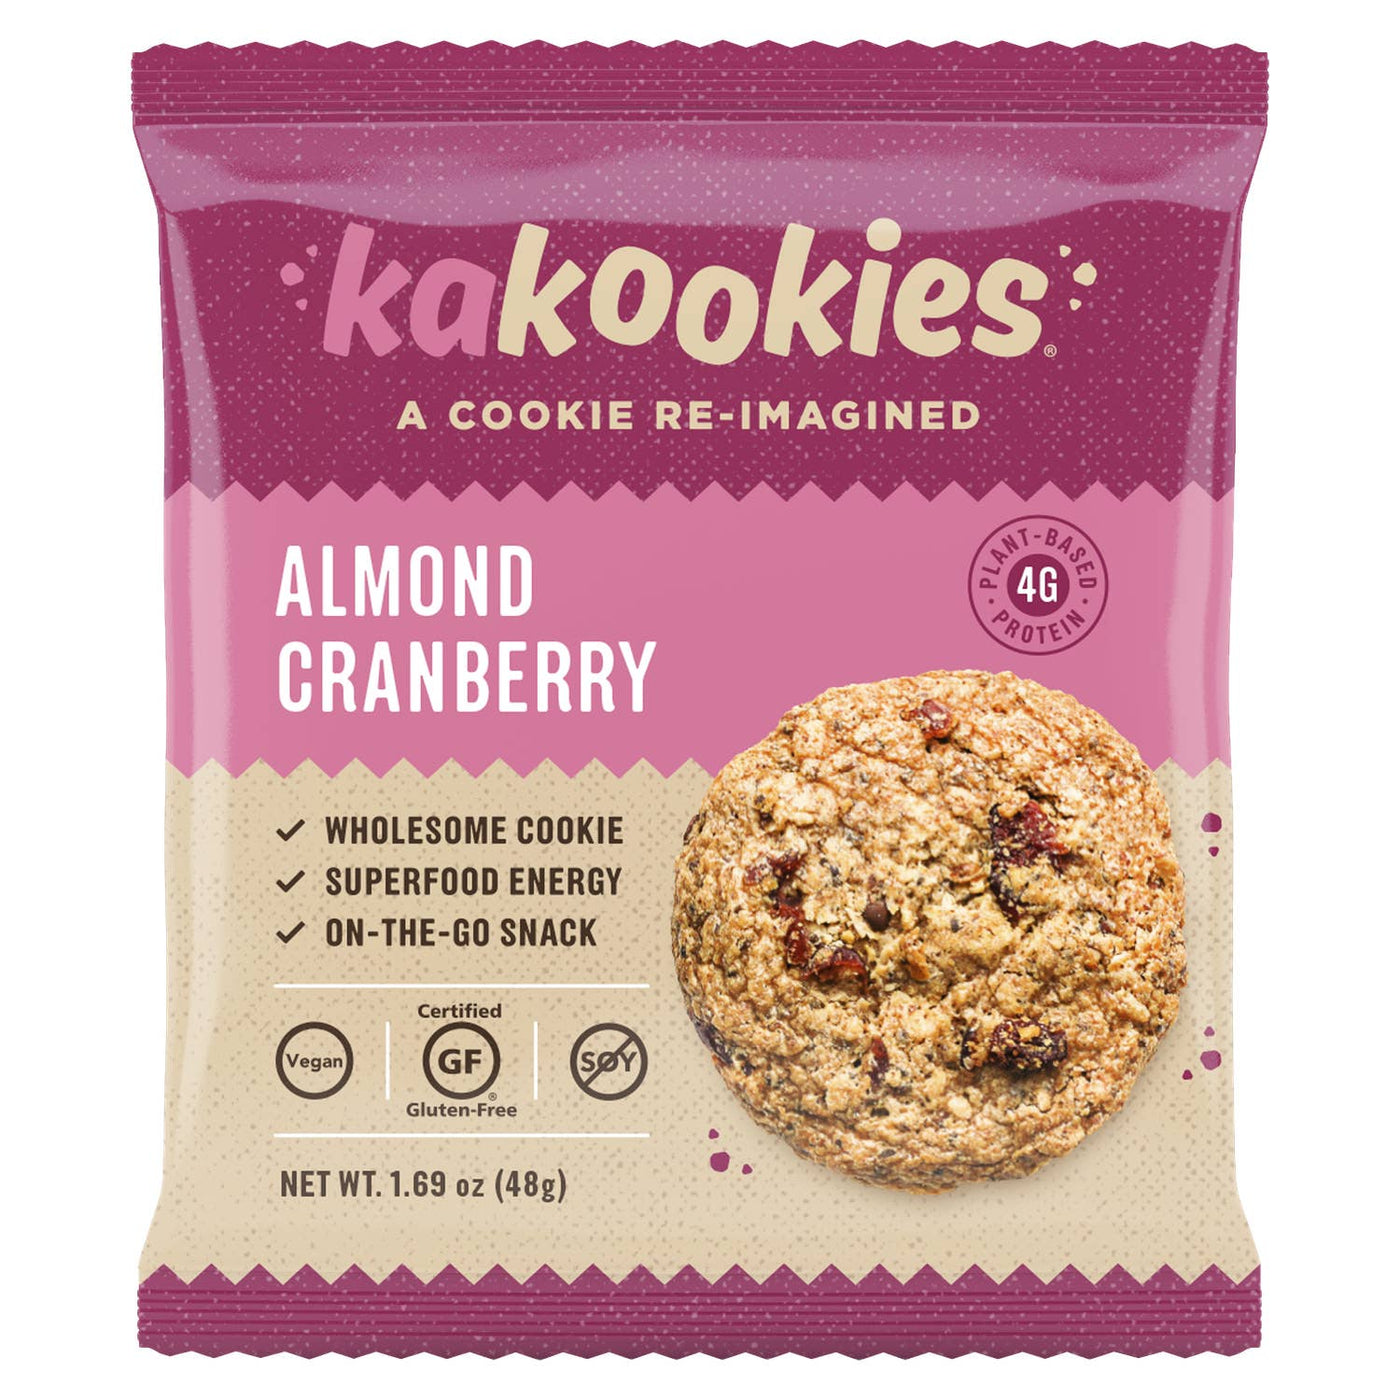 Almond Cranberry Cookies - The Lake and Company